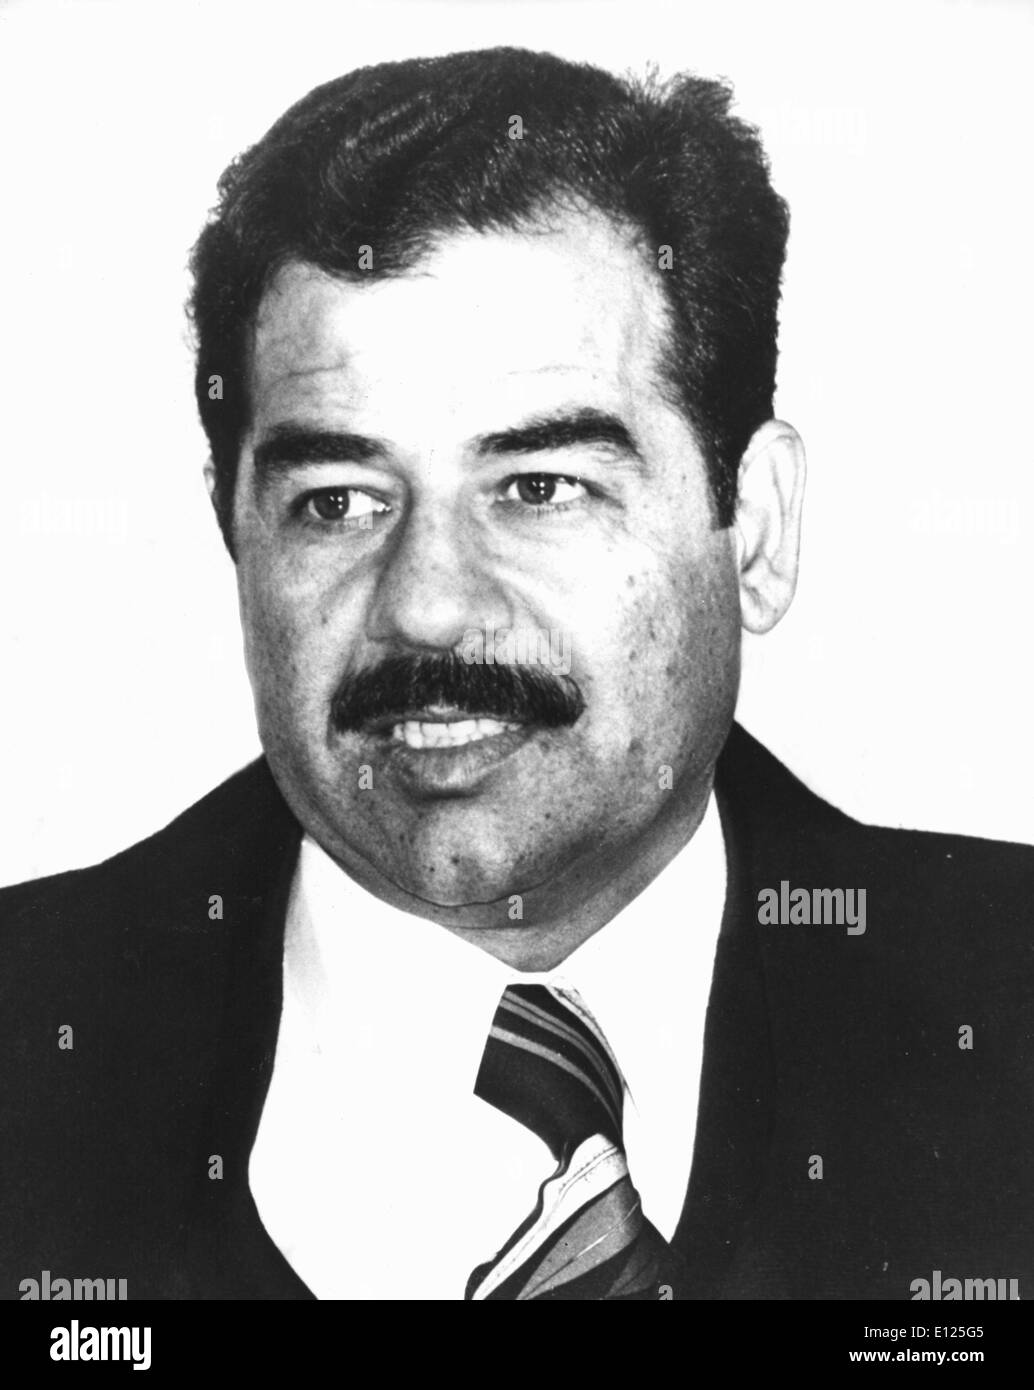 Dec 14, 2003; Baghdad, IRAQ; FILE PHOTO Saddam Hussein Captured by US forces today December 14, 2003 in Tikrit, Iraq. Pictured Stock Photo